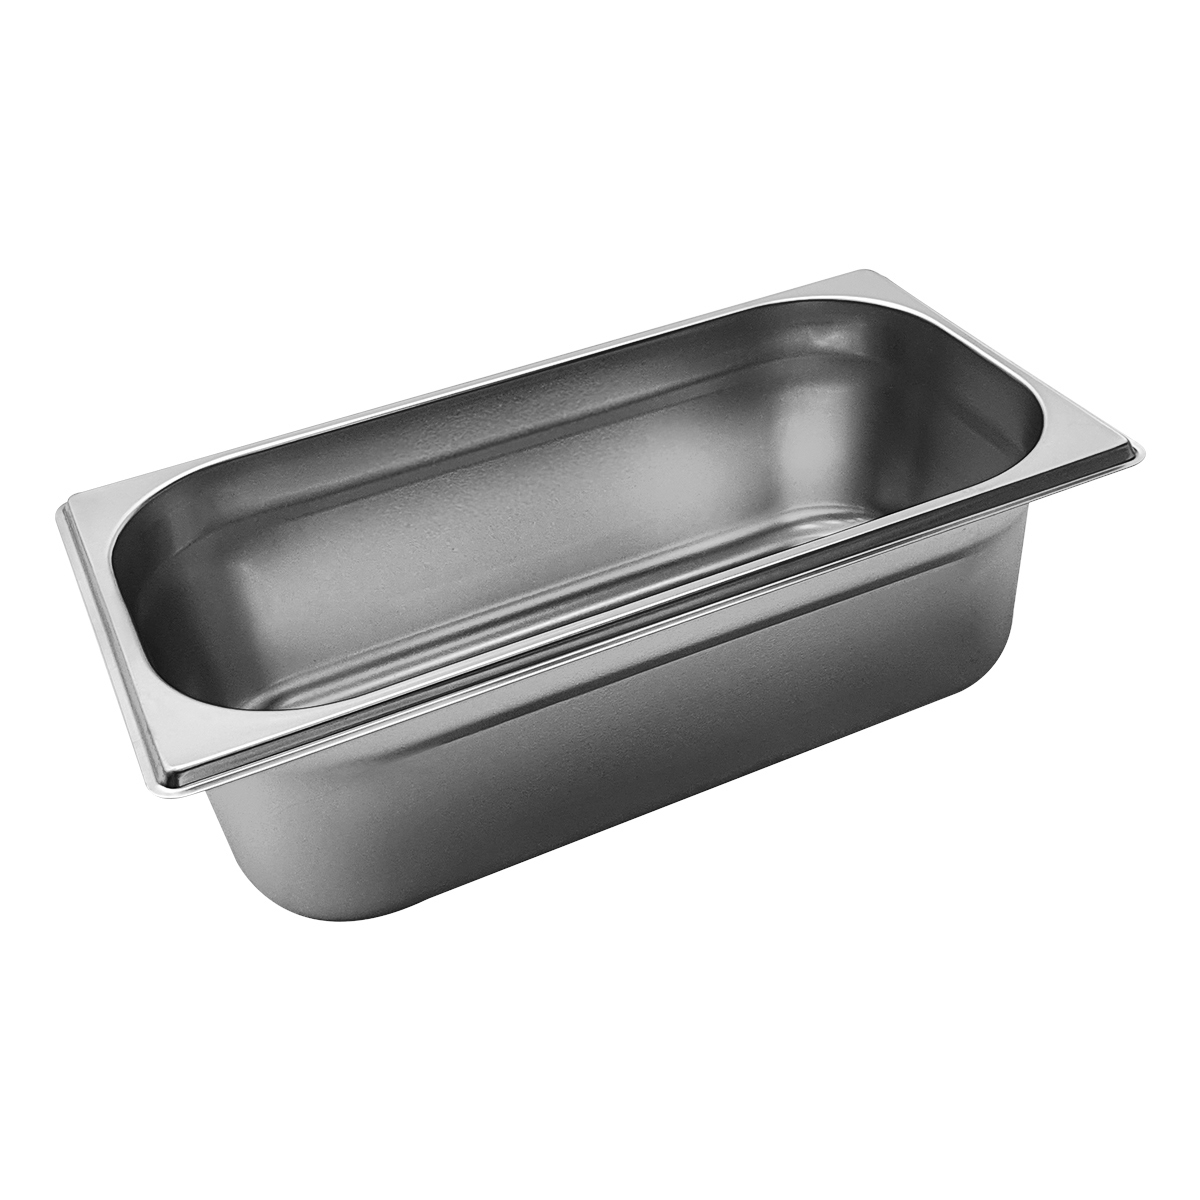 Cater-Cook 1/3 Stainless Steel Gastronorm Container 100mm Deep - CK4020